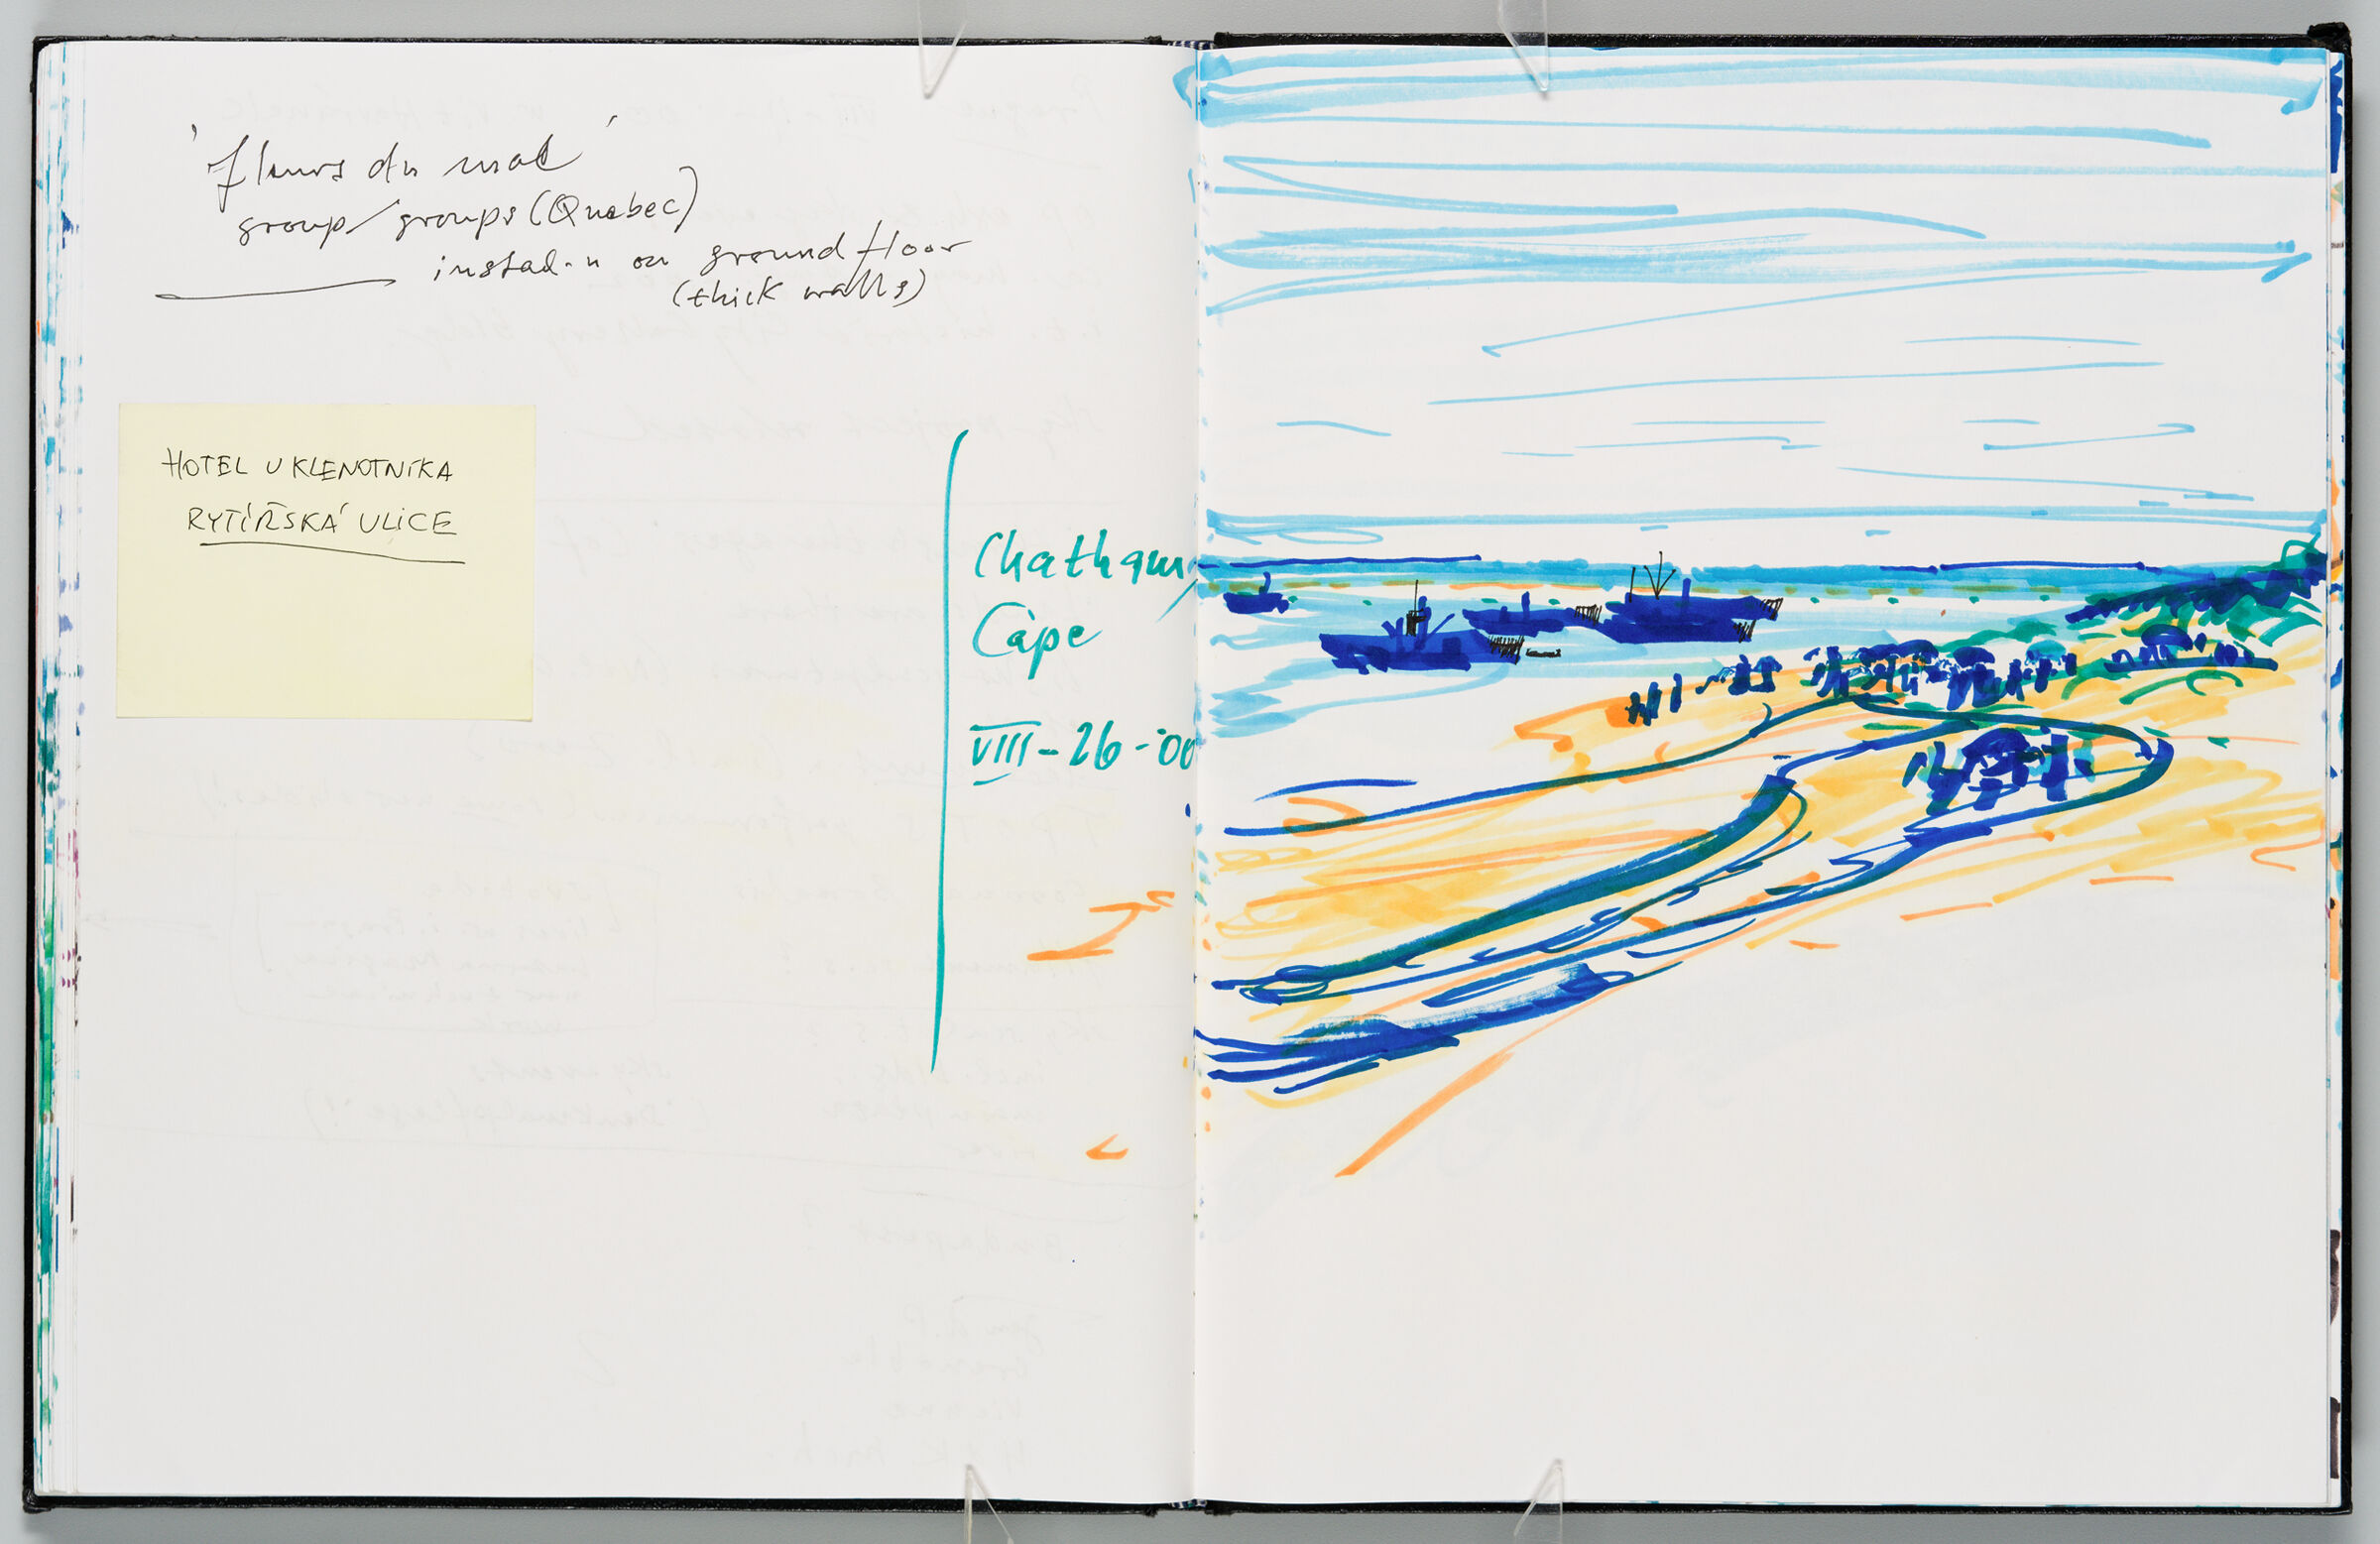 Untitled (Notes And Sticky Note, Left Page); Untitled (Chatham Cape Seascape, Right Page)